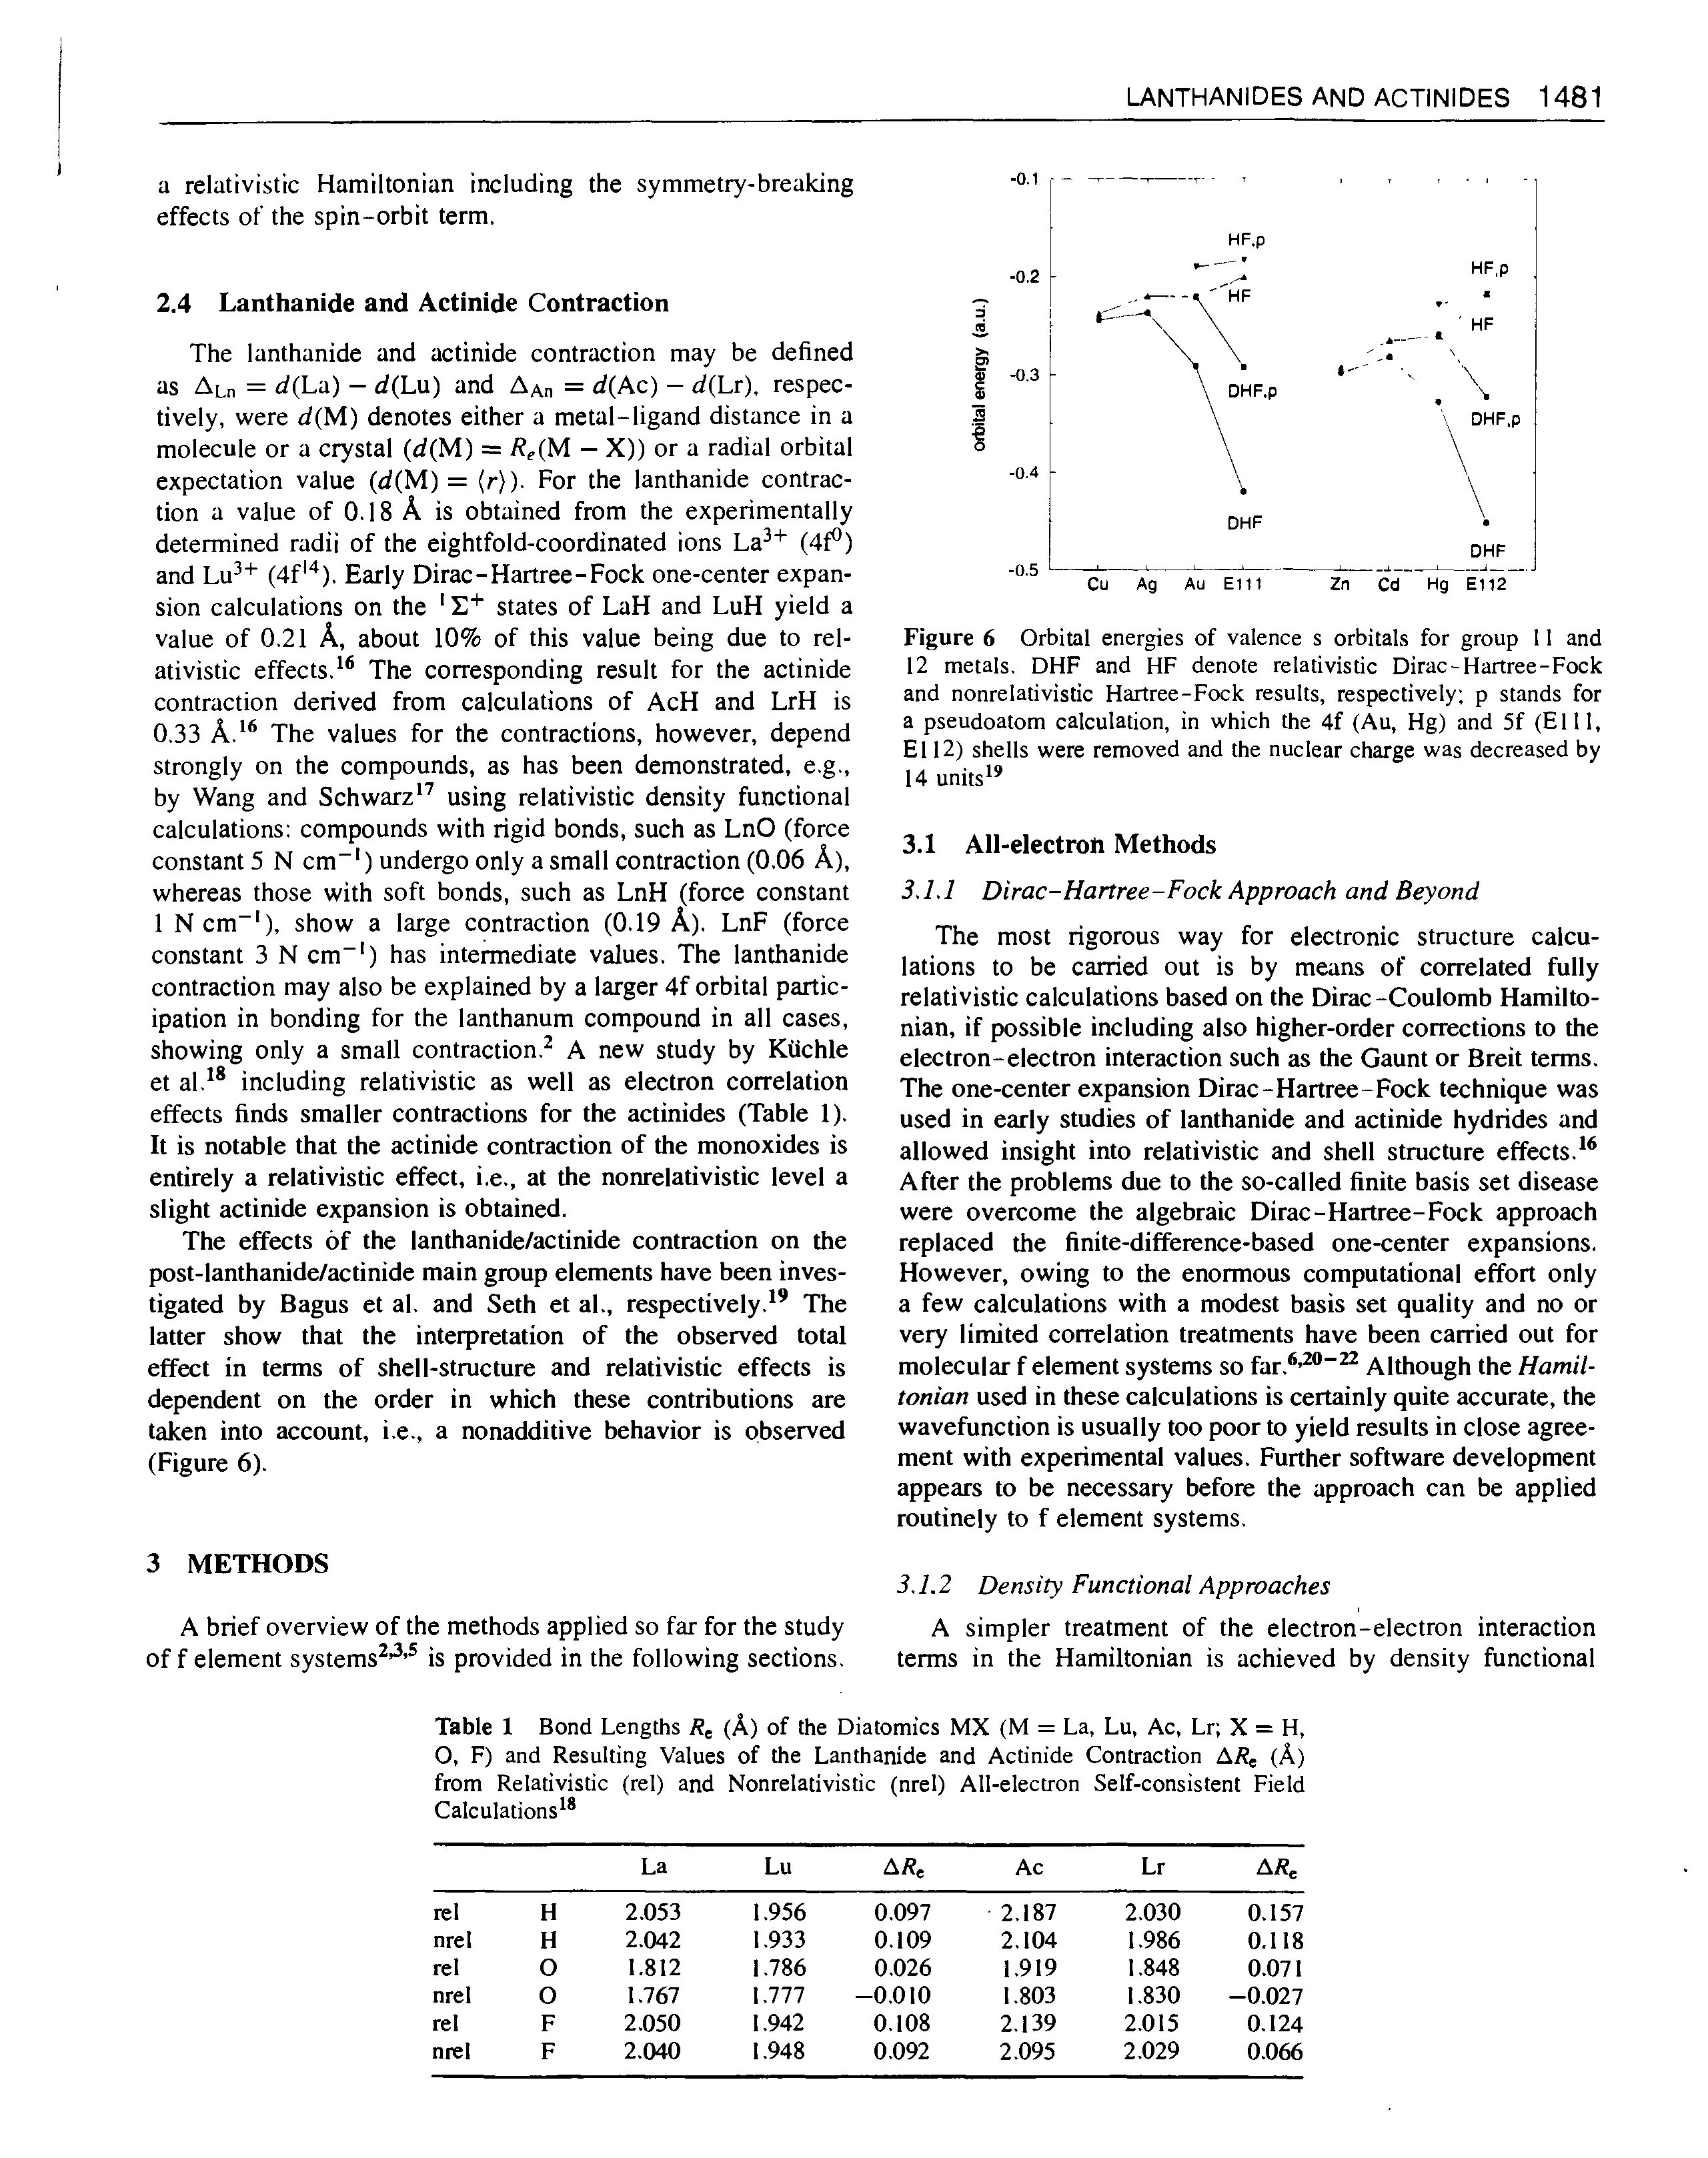 Table 1 Bond Lengths (A) of the Diatomics MX (M = La, Lu, Ac, Lr X = H, 0, F) and Resulting Values of the Lanthanide and Actinide Contraction A/ e (A) from Relativistic (rel) and Nonrelativistic (nrel) All-electron Self-consistent Field Calculations ...